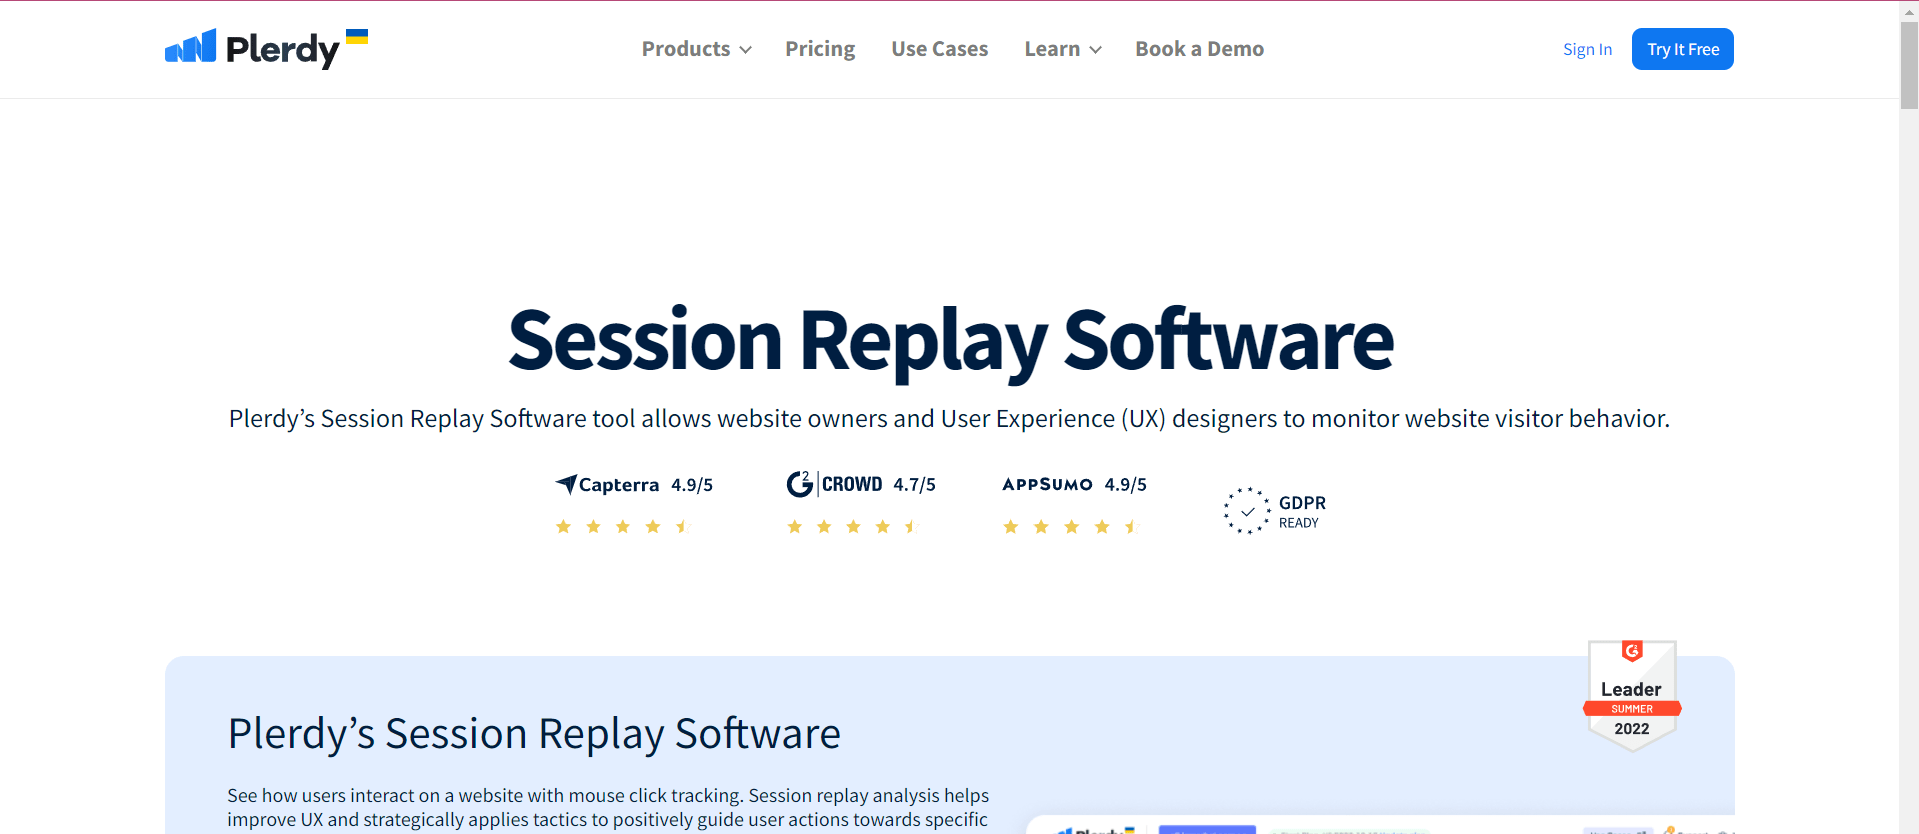 session replay software: plerdy